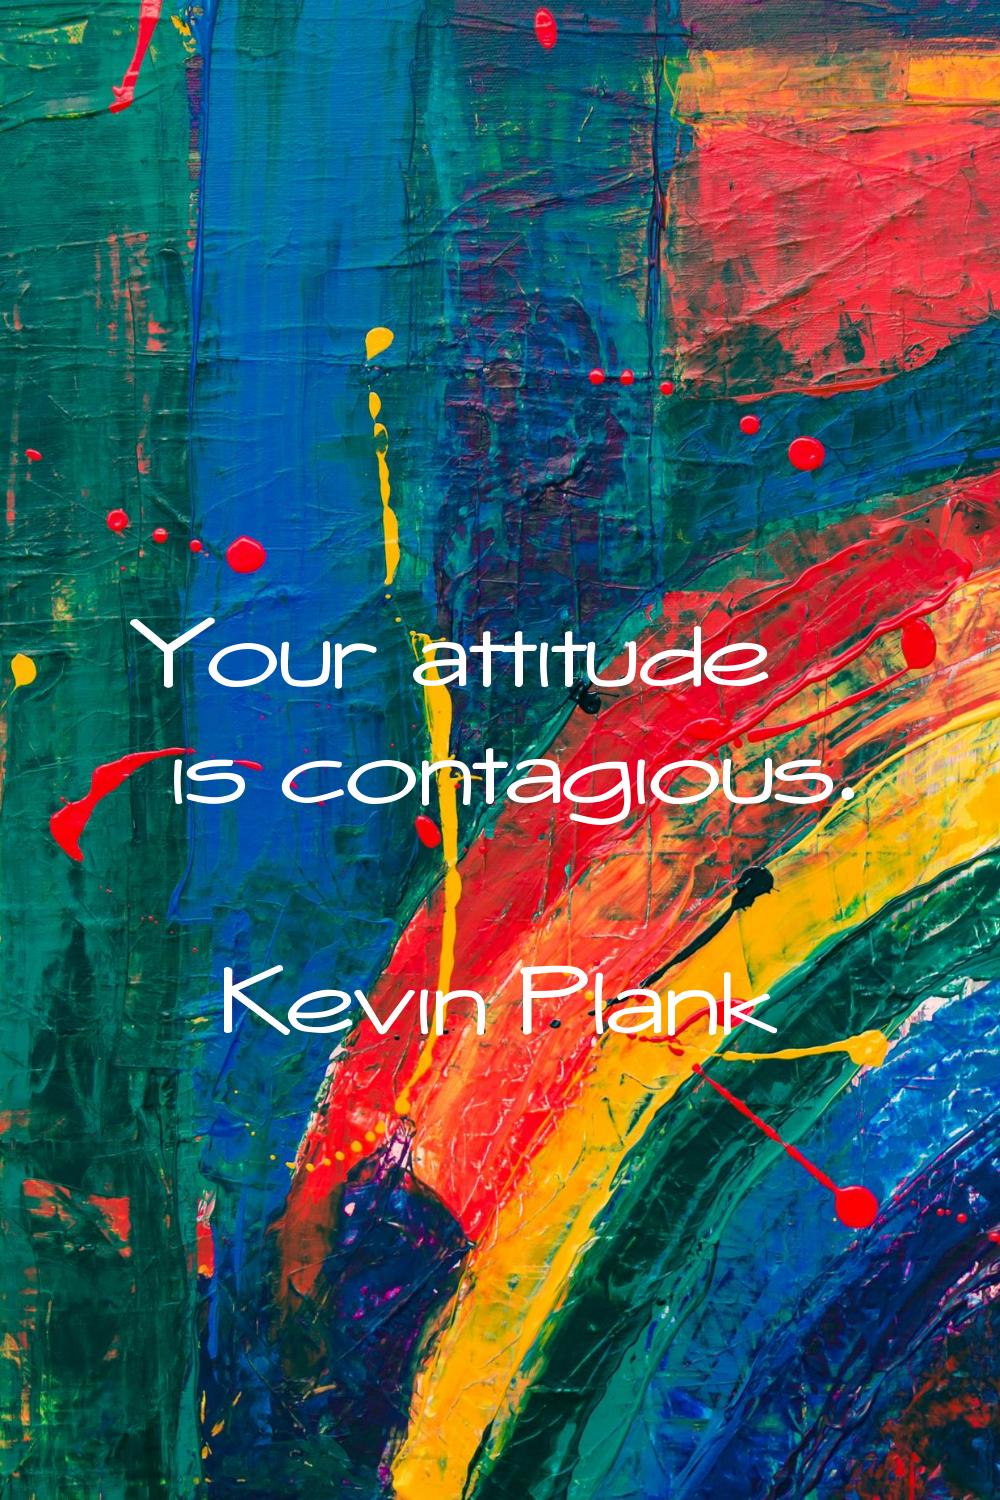 Your attitude is contagious.